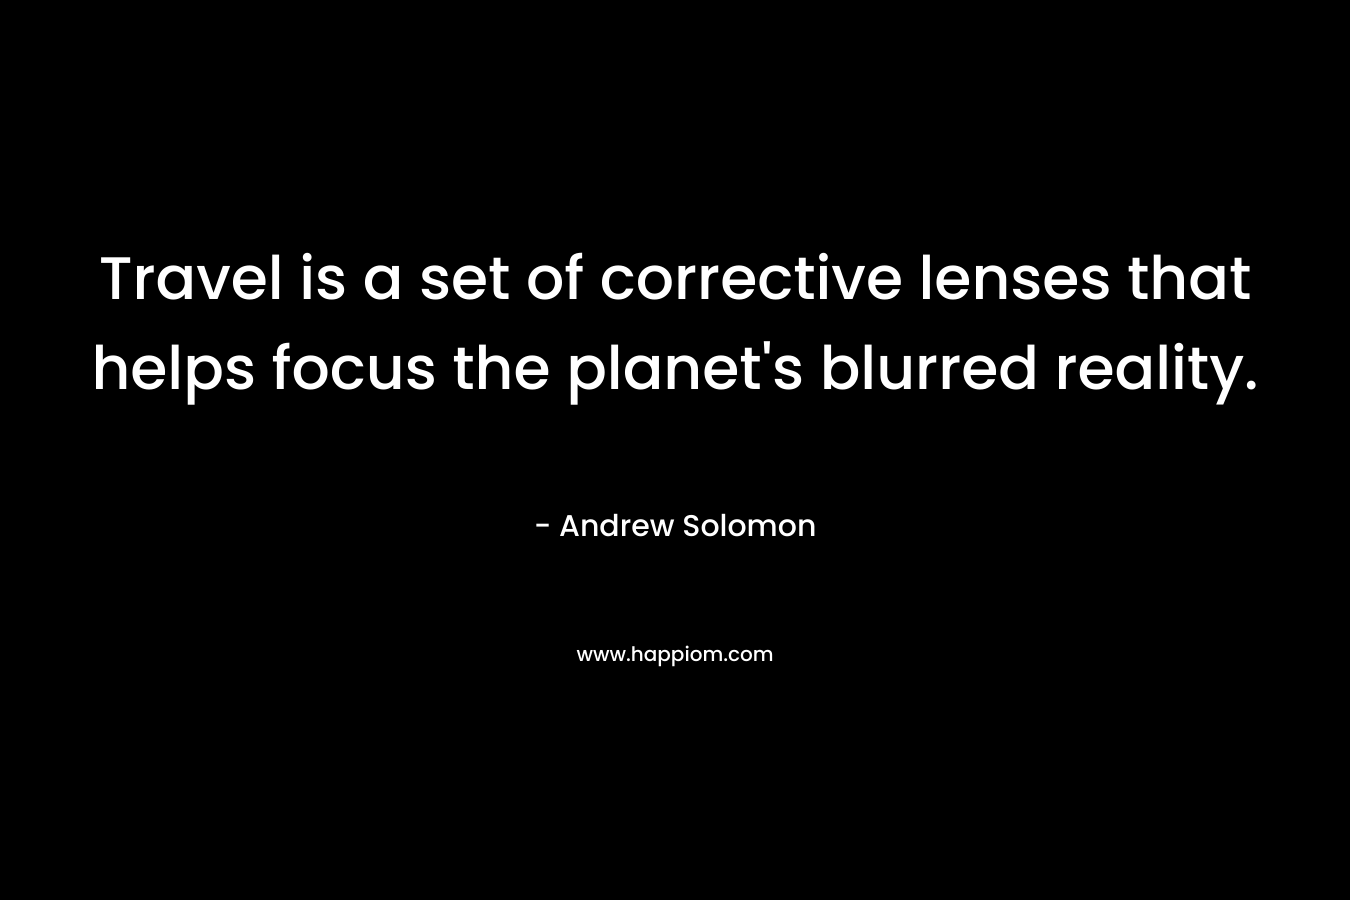 Travel is a set of corrective lenses that helps focus the planet’s blurred reality. – Andrew Solomon